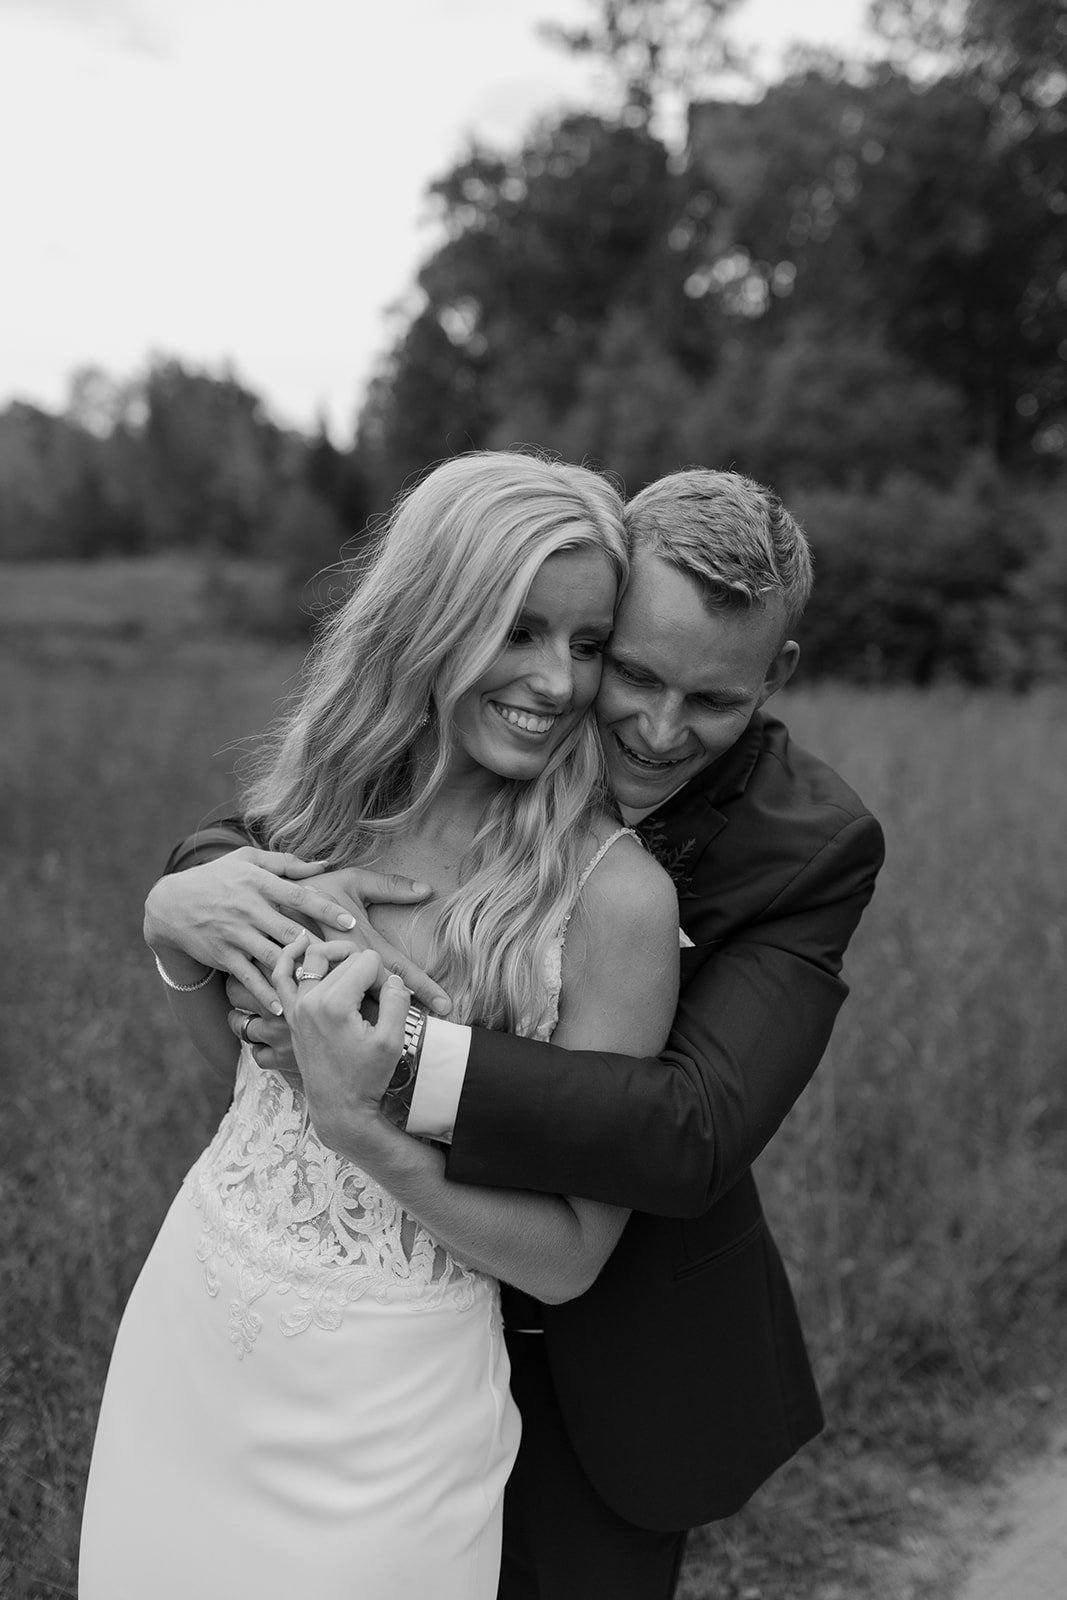 Bride and groom hug in a field of grass